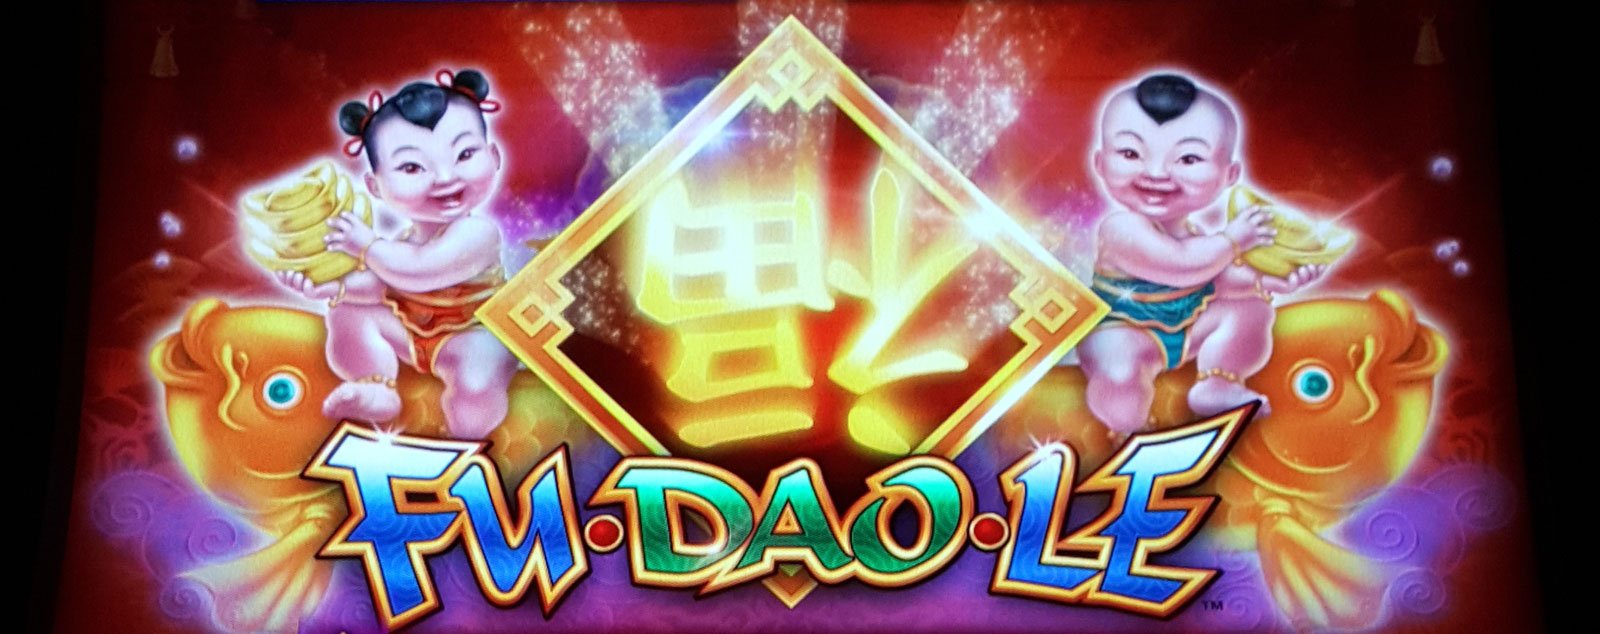 Play Fu Dao Le Online